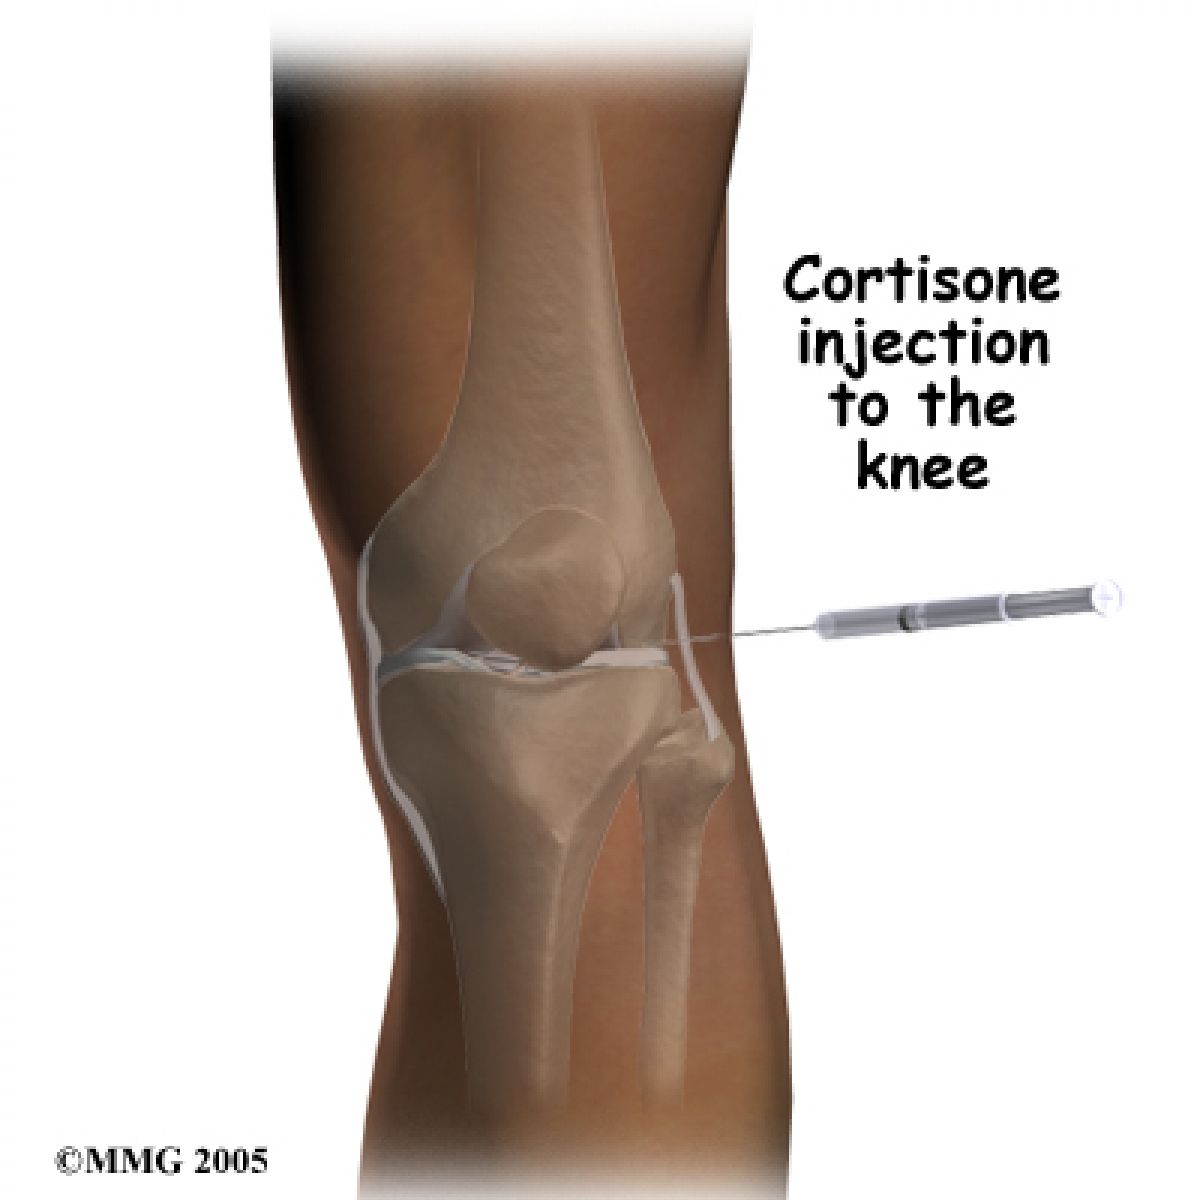 Is steroid injection bad for your knee?